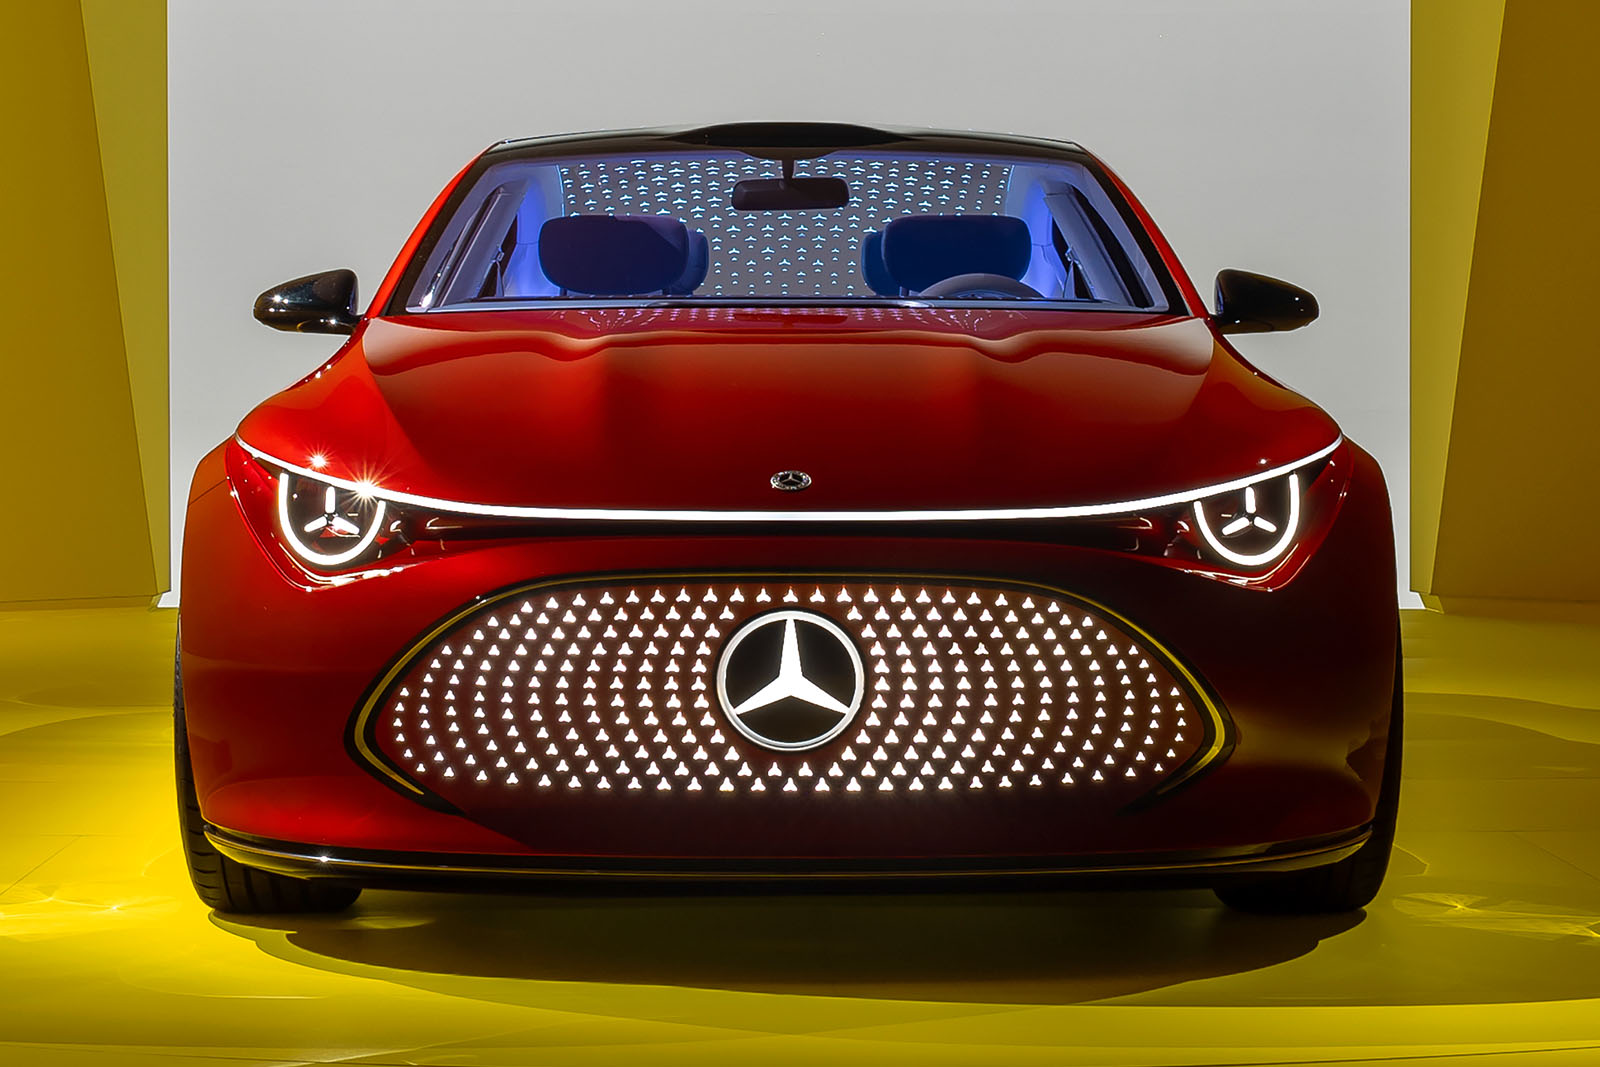 New Mercedes Concept CLA Class revealed: everything you need to